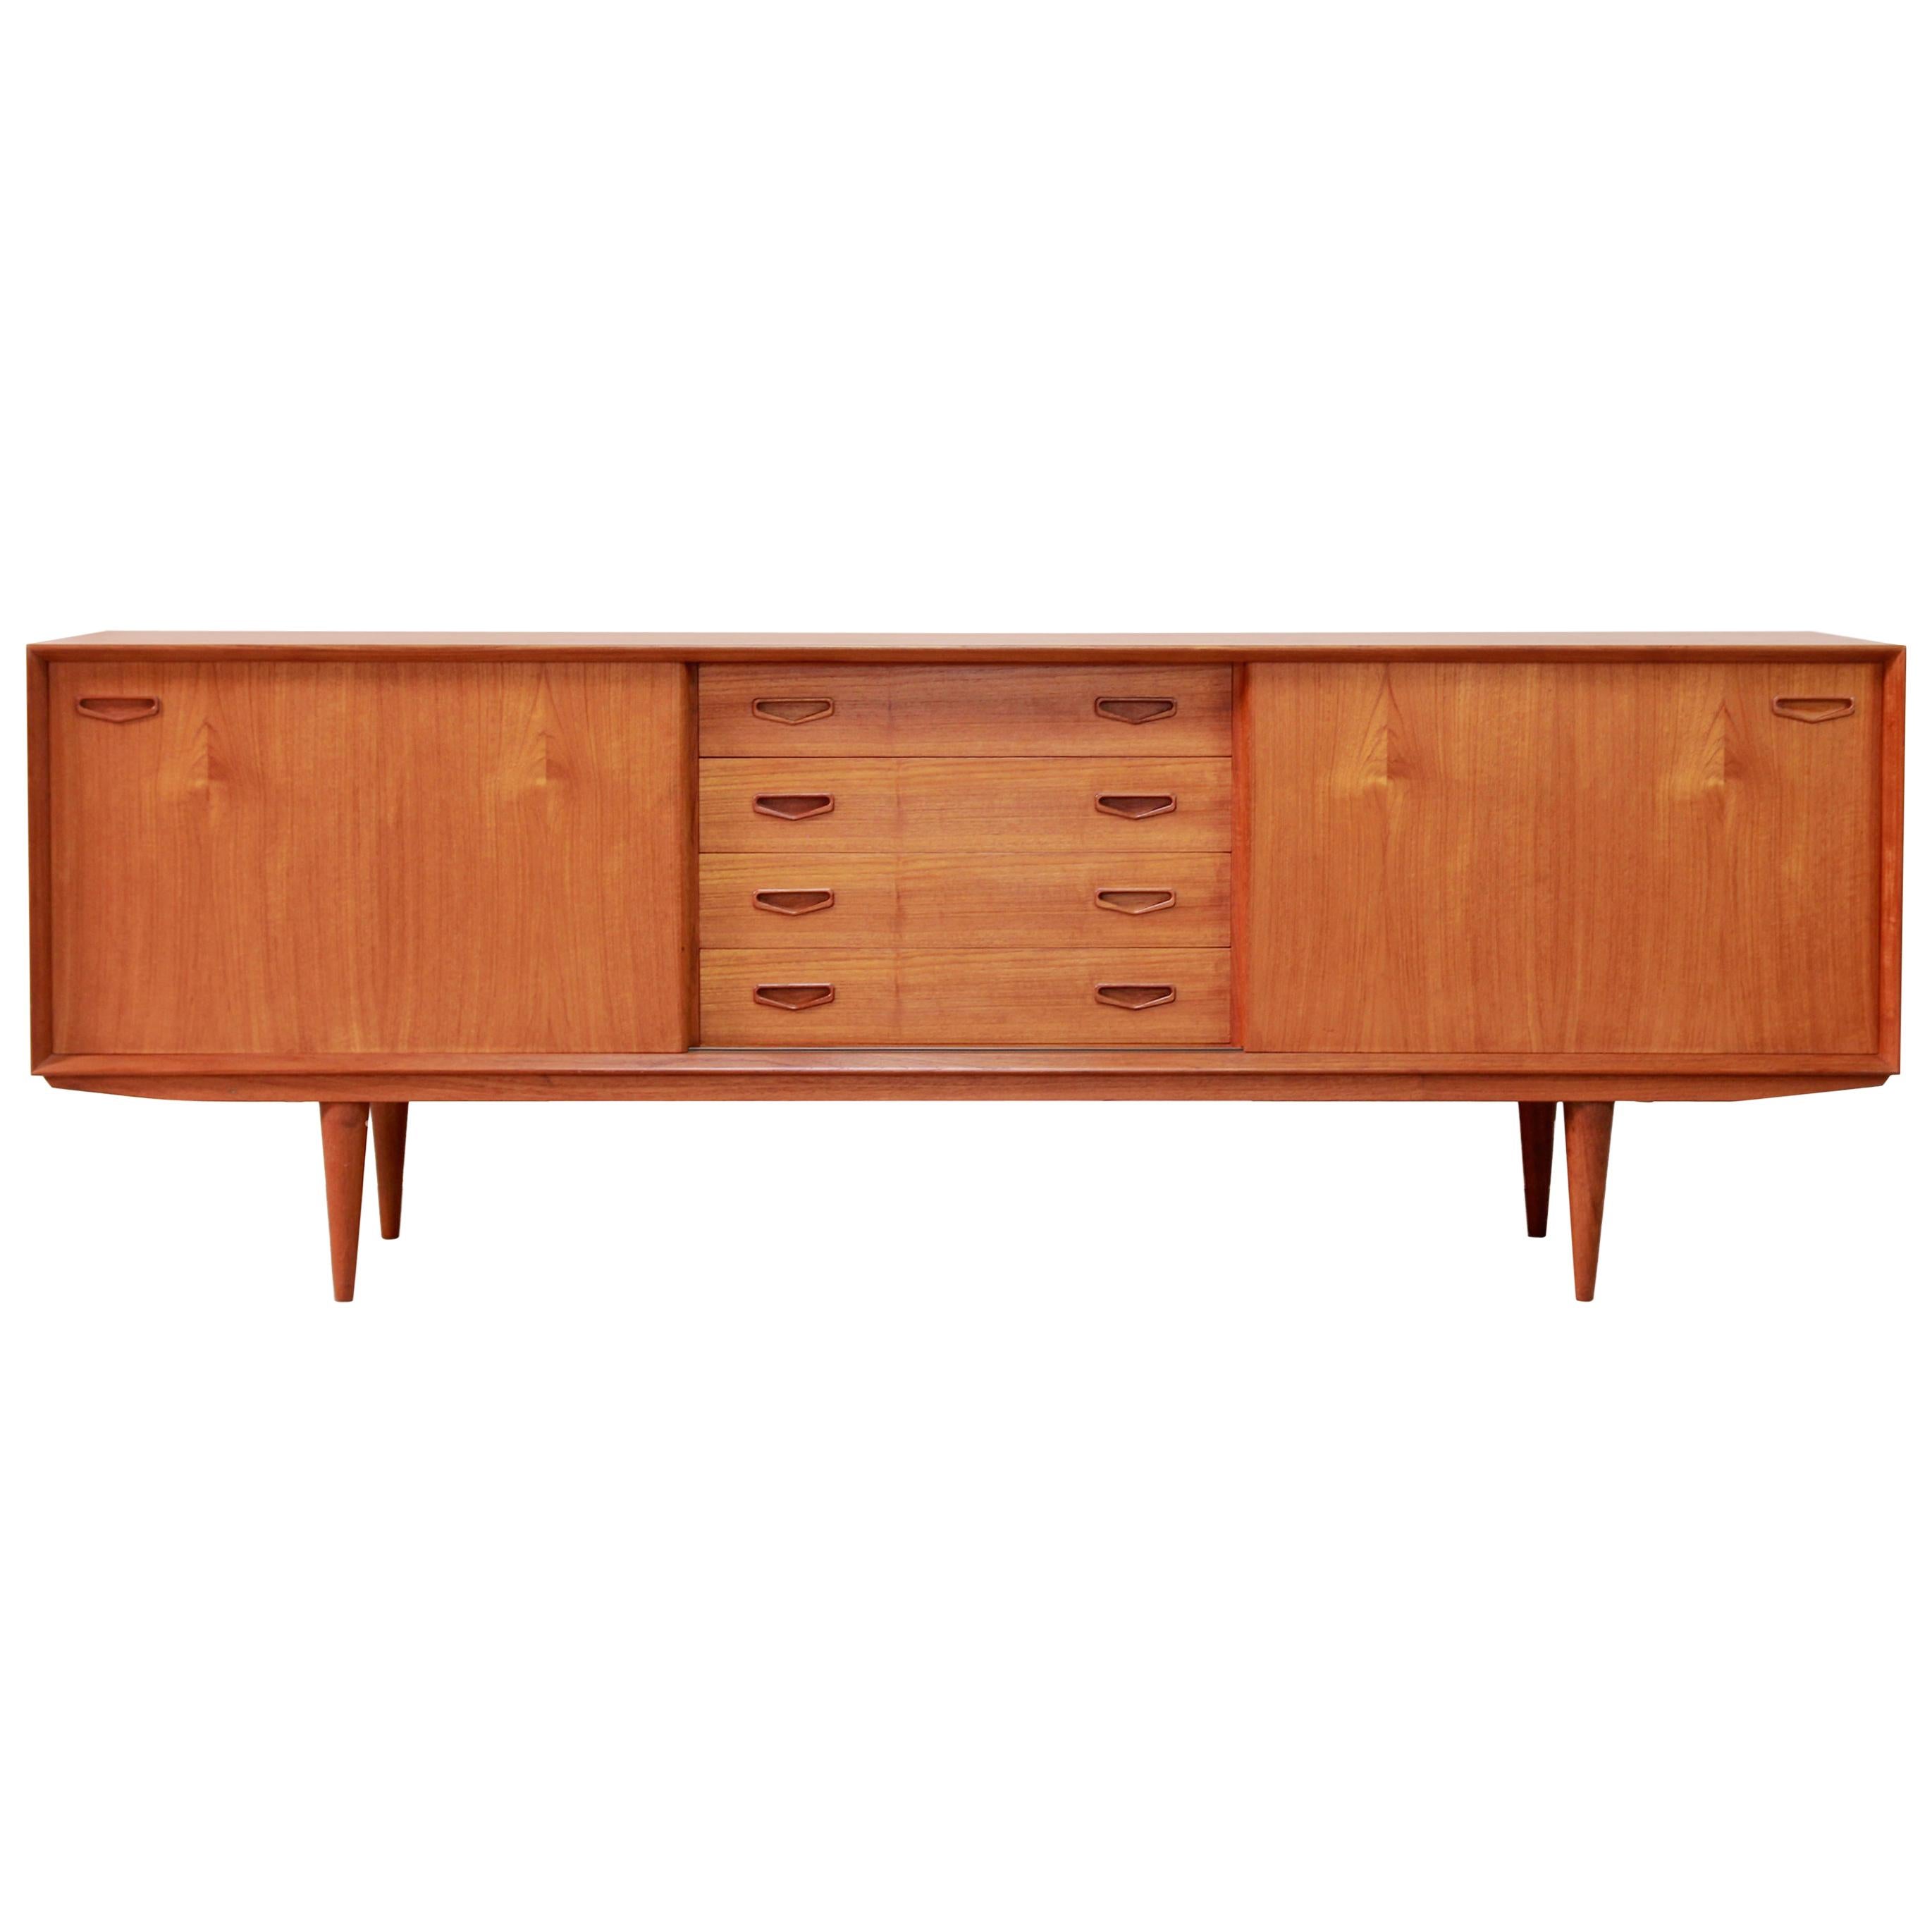 Danish Modern Design Sideboard Credenza from Clausen and Son in Teak, 1960s